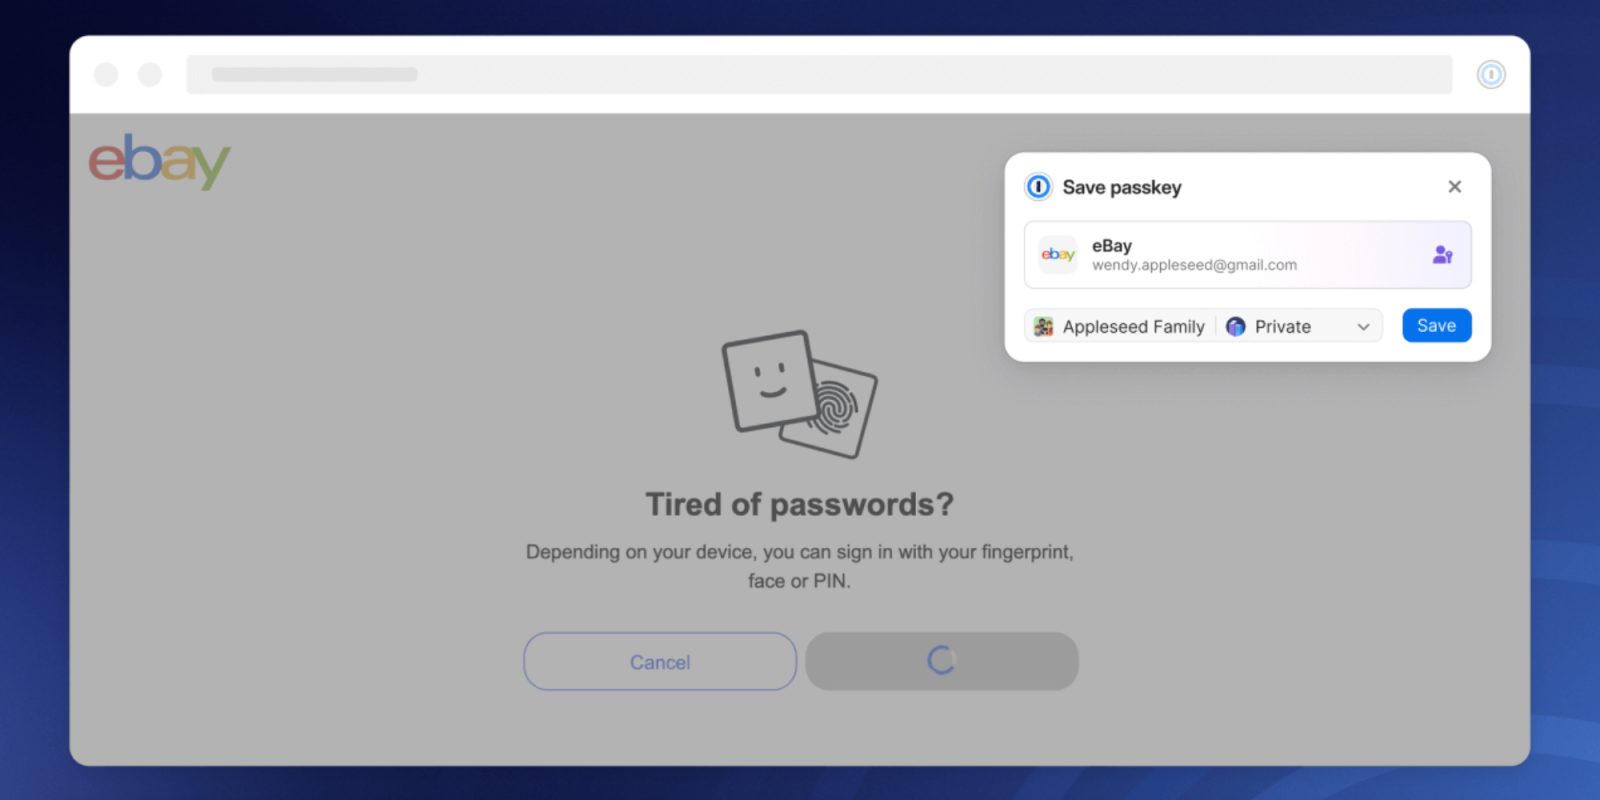 1password passkey support for the web launches in public beta